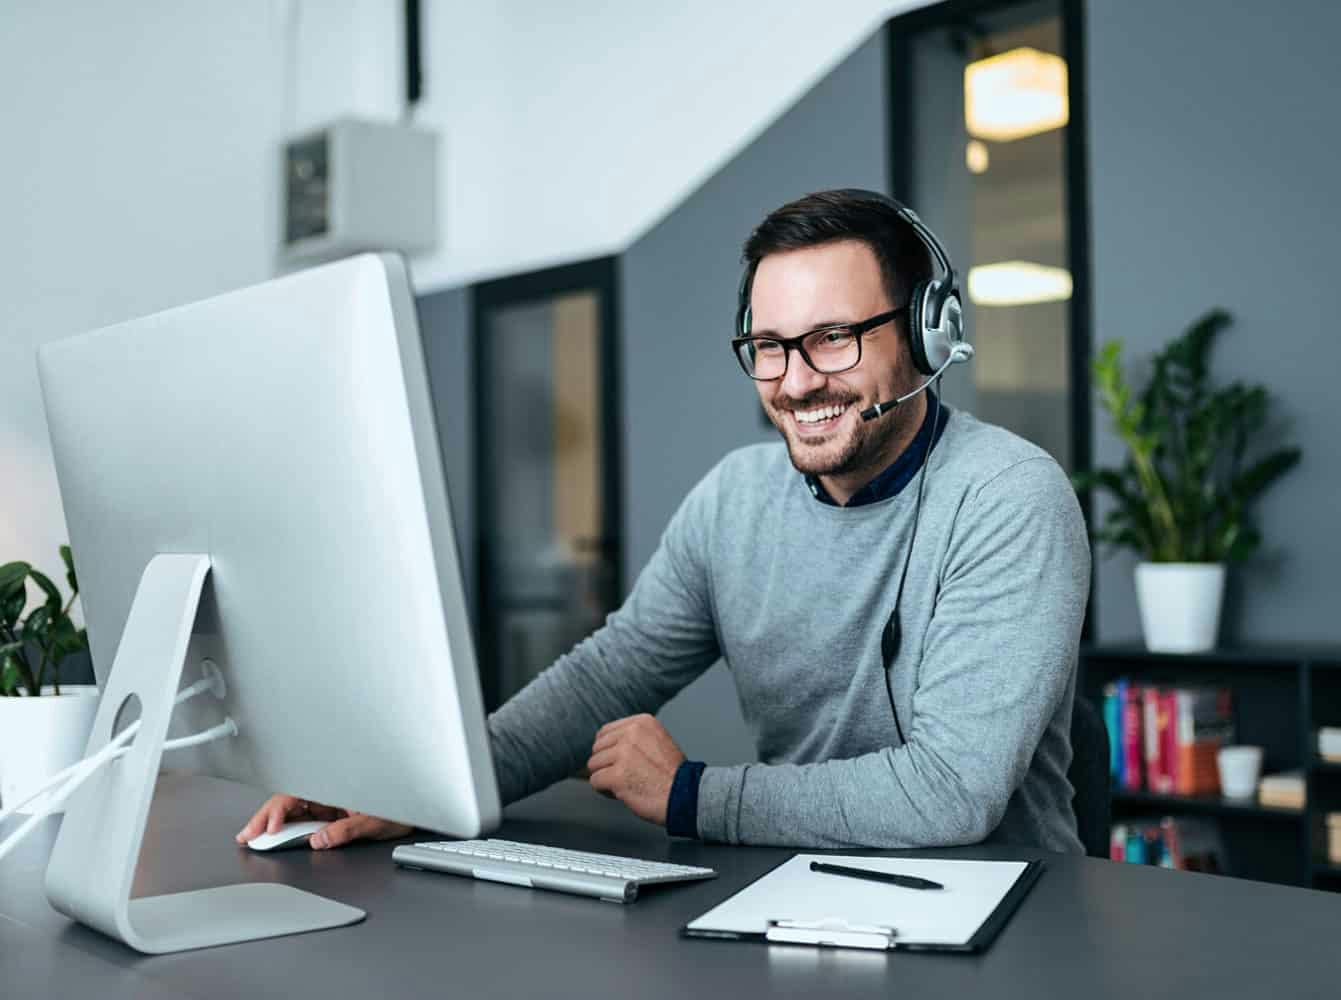 Man sitting at his desk with headset on